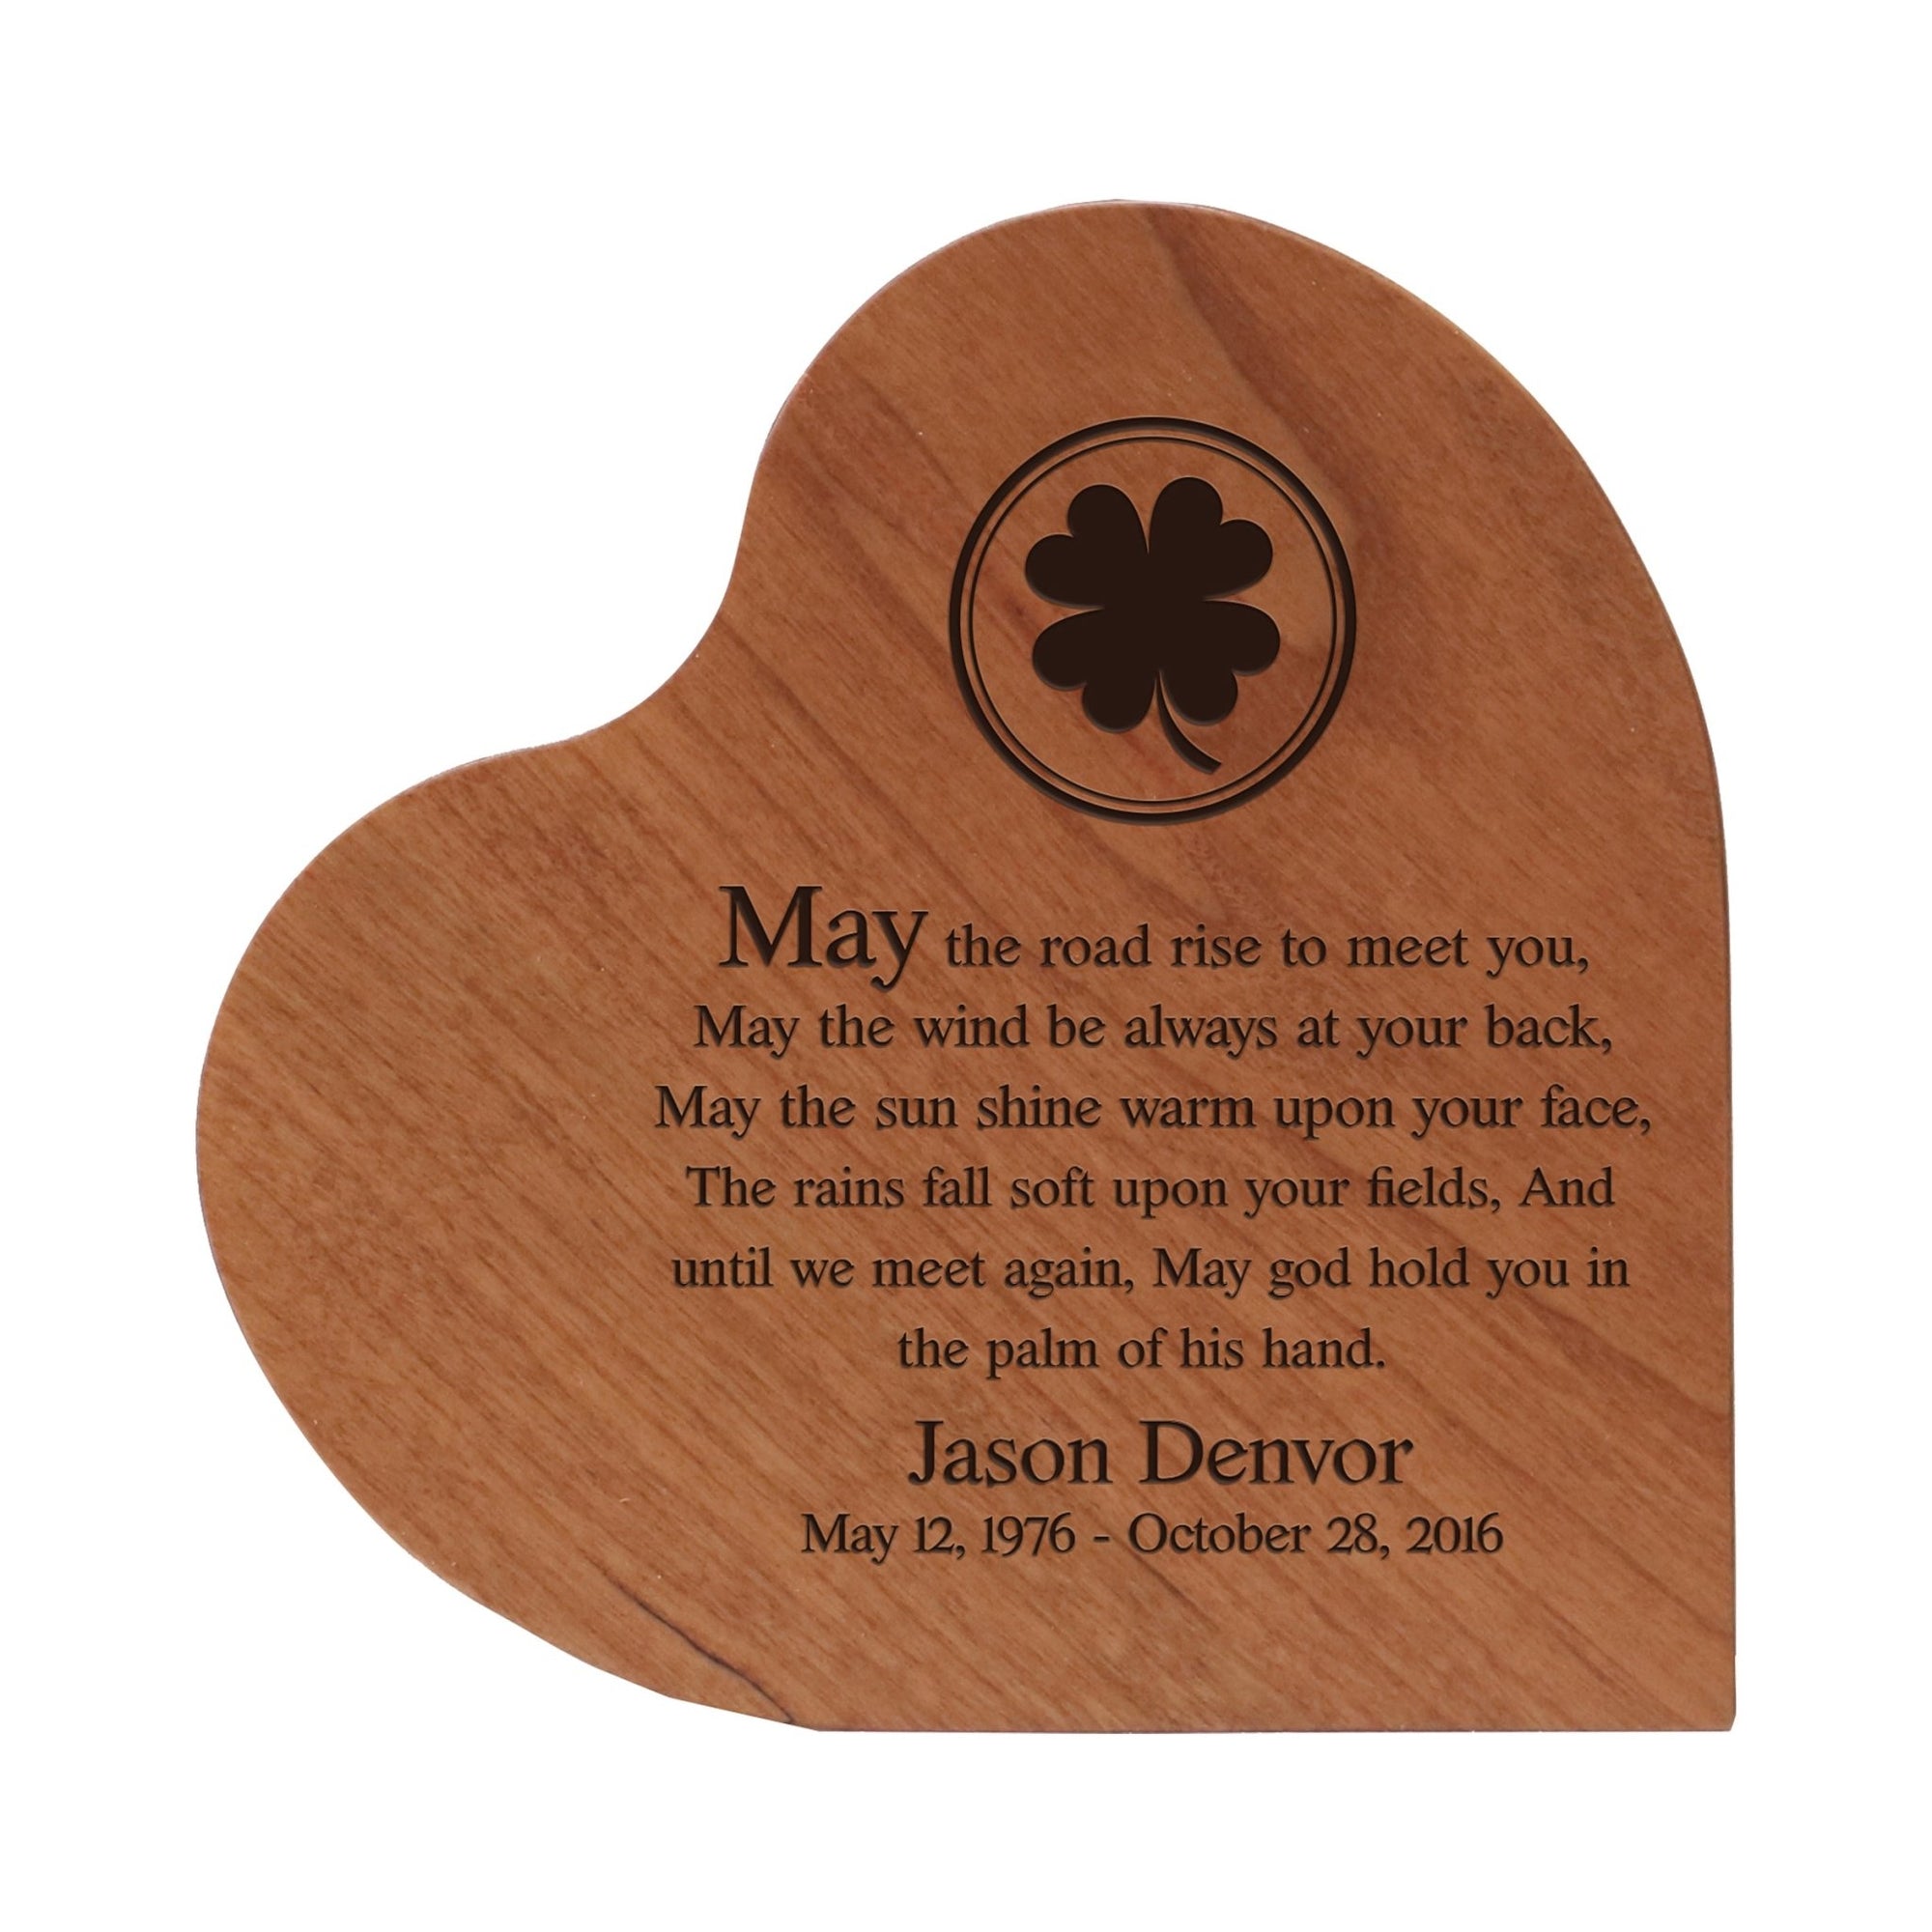 Personalized Small Heart Cremation Urn Keepsake For Human Ashes May The Road Rise - LifeSong Milestones